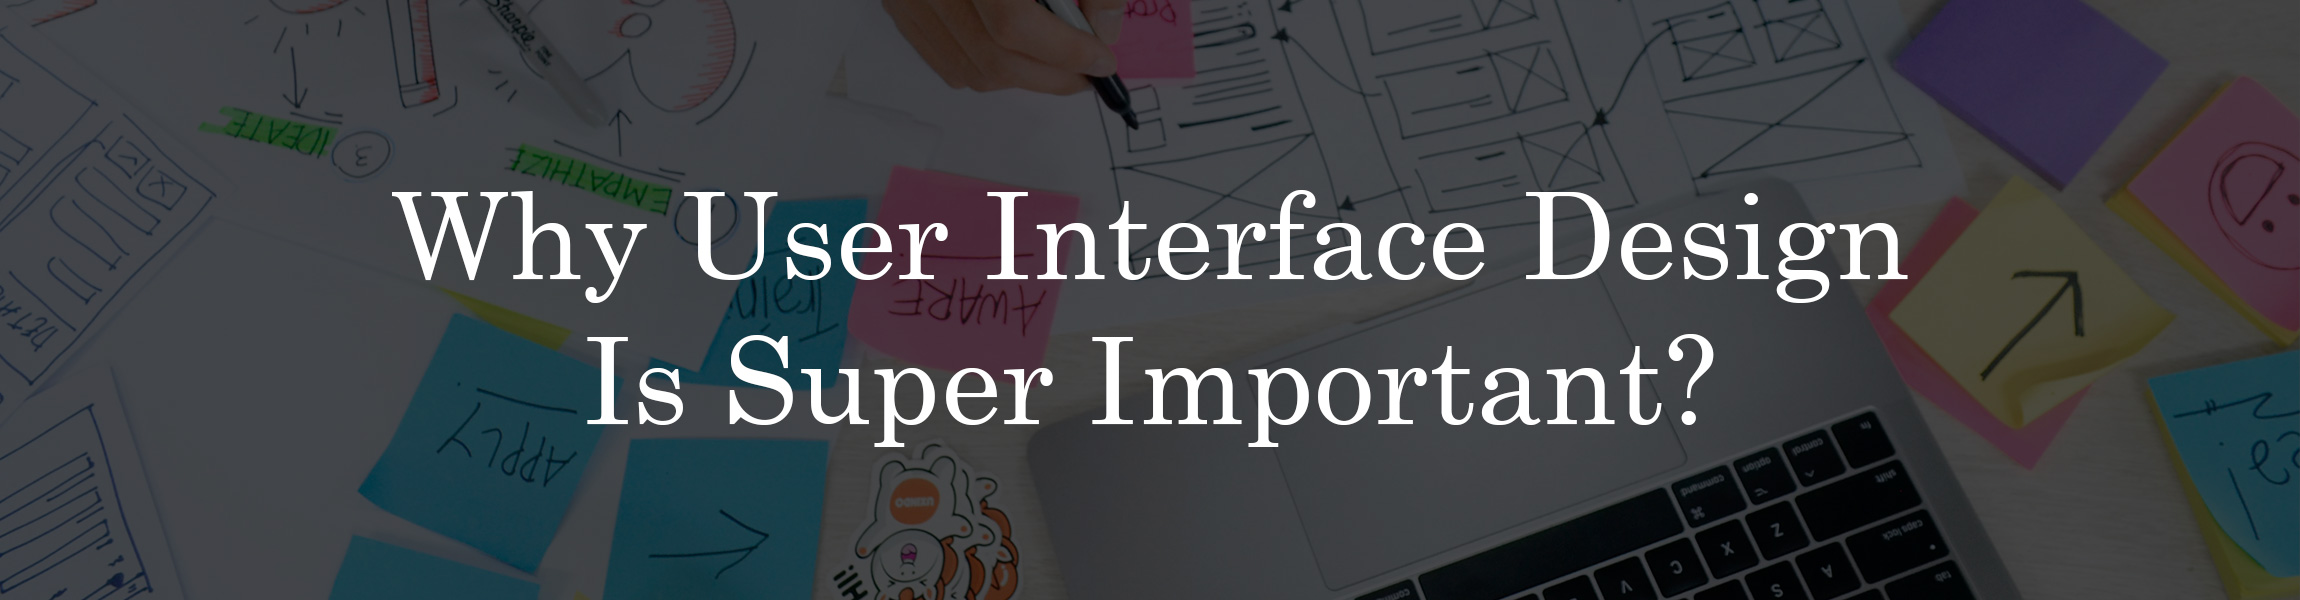 Why User Interface Design Is Super Important?